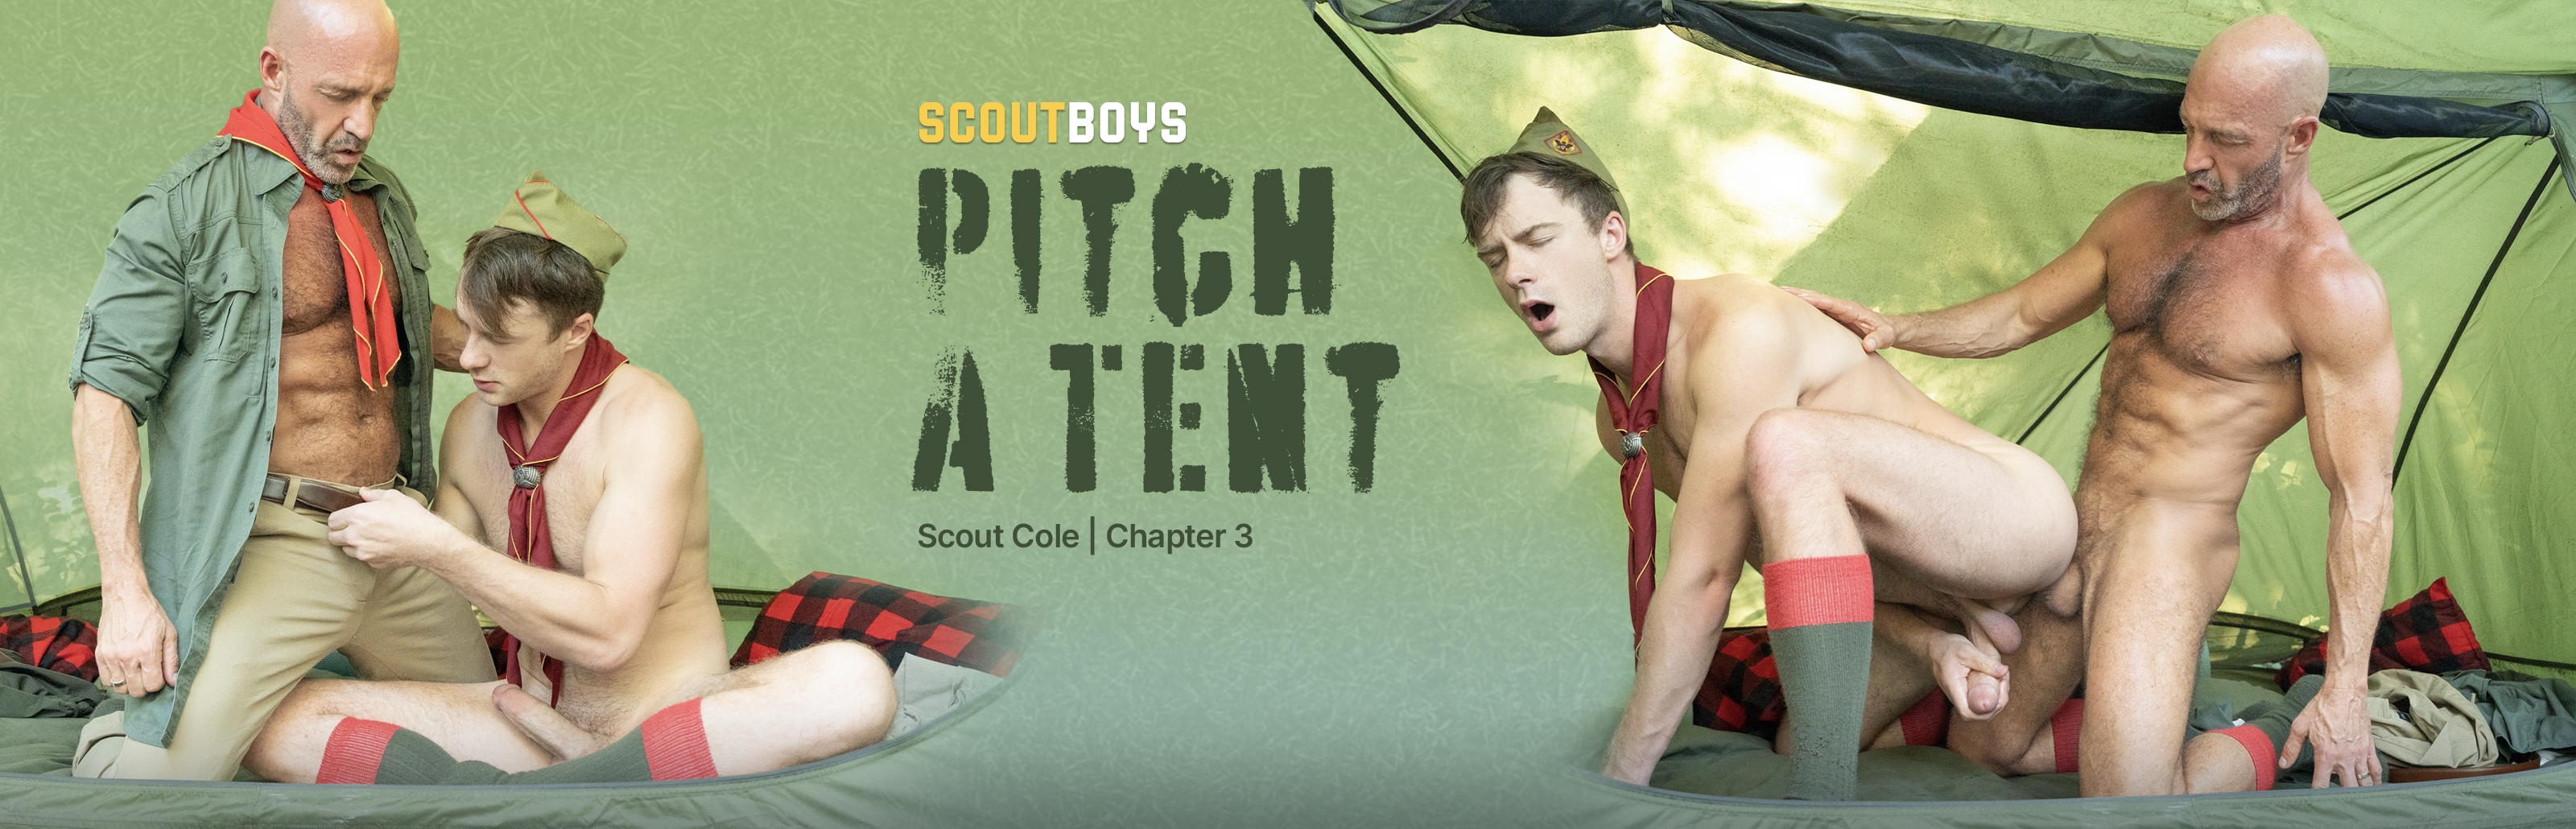 Pitch a Tent | SCOUT COLE | Chapter 3 Photos 97